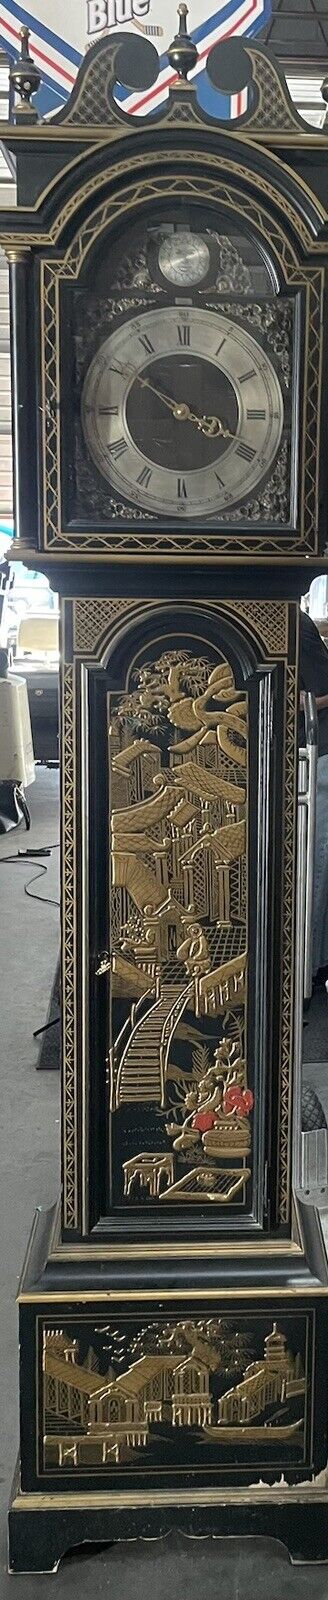 Colonial of Zeeland Chinoserie Paint Decorated Grandfather Clock